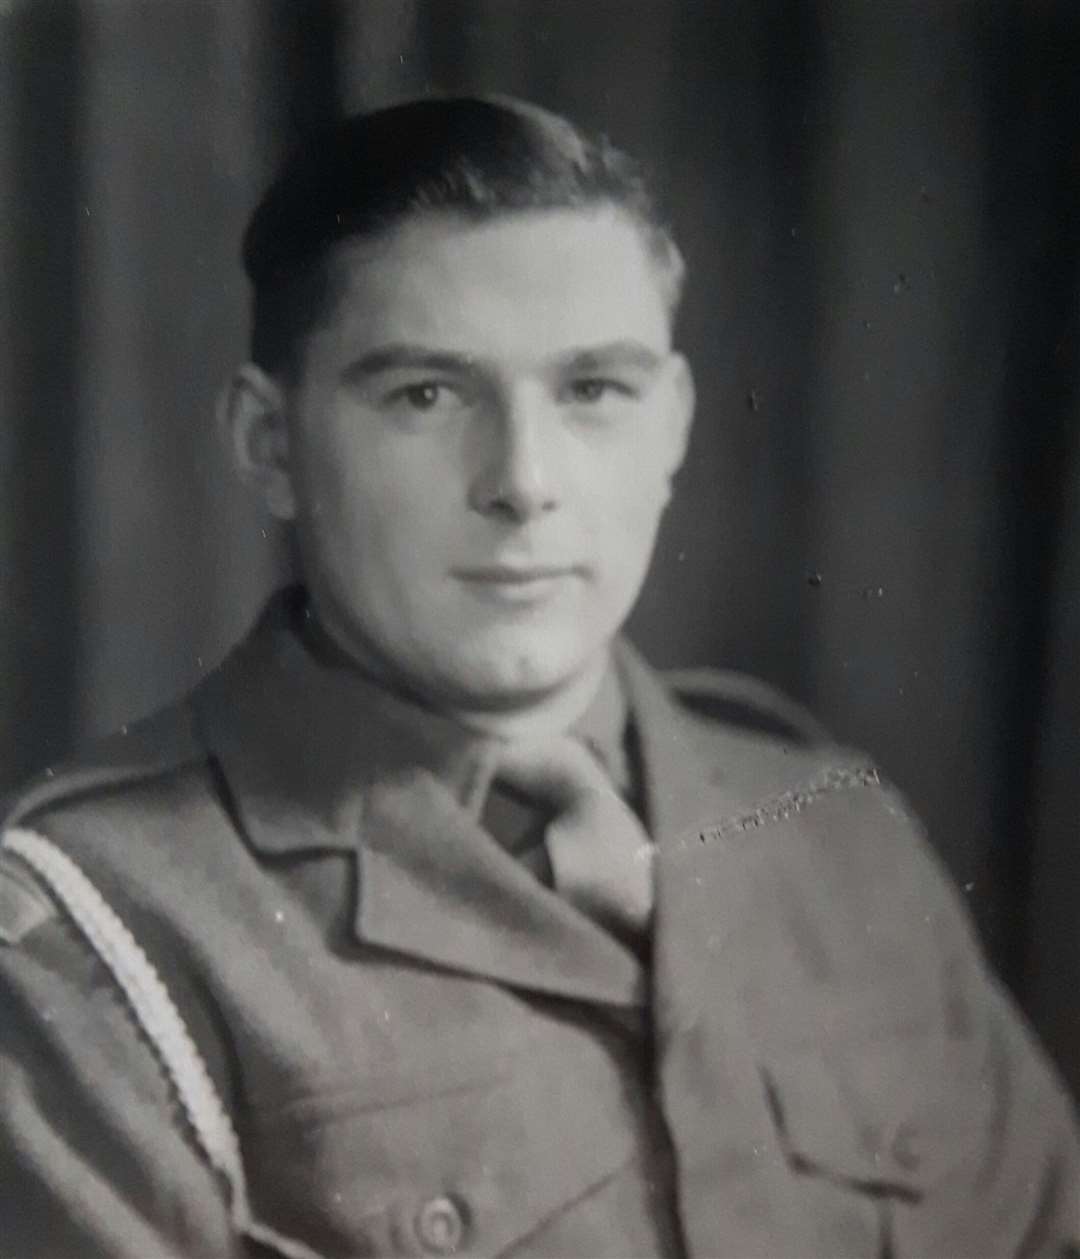 Don Esland during his National Service